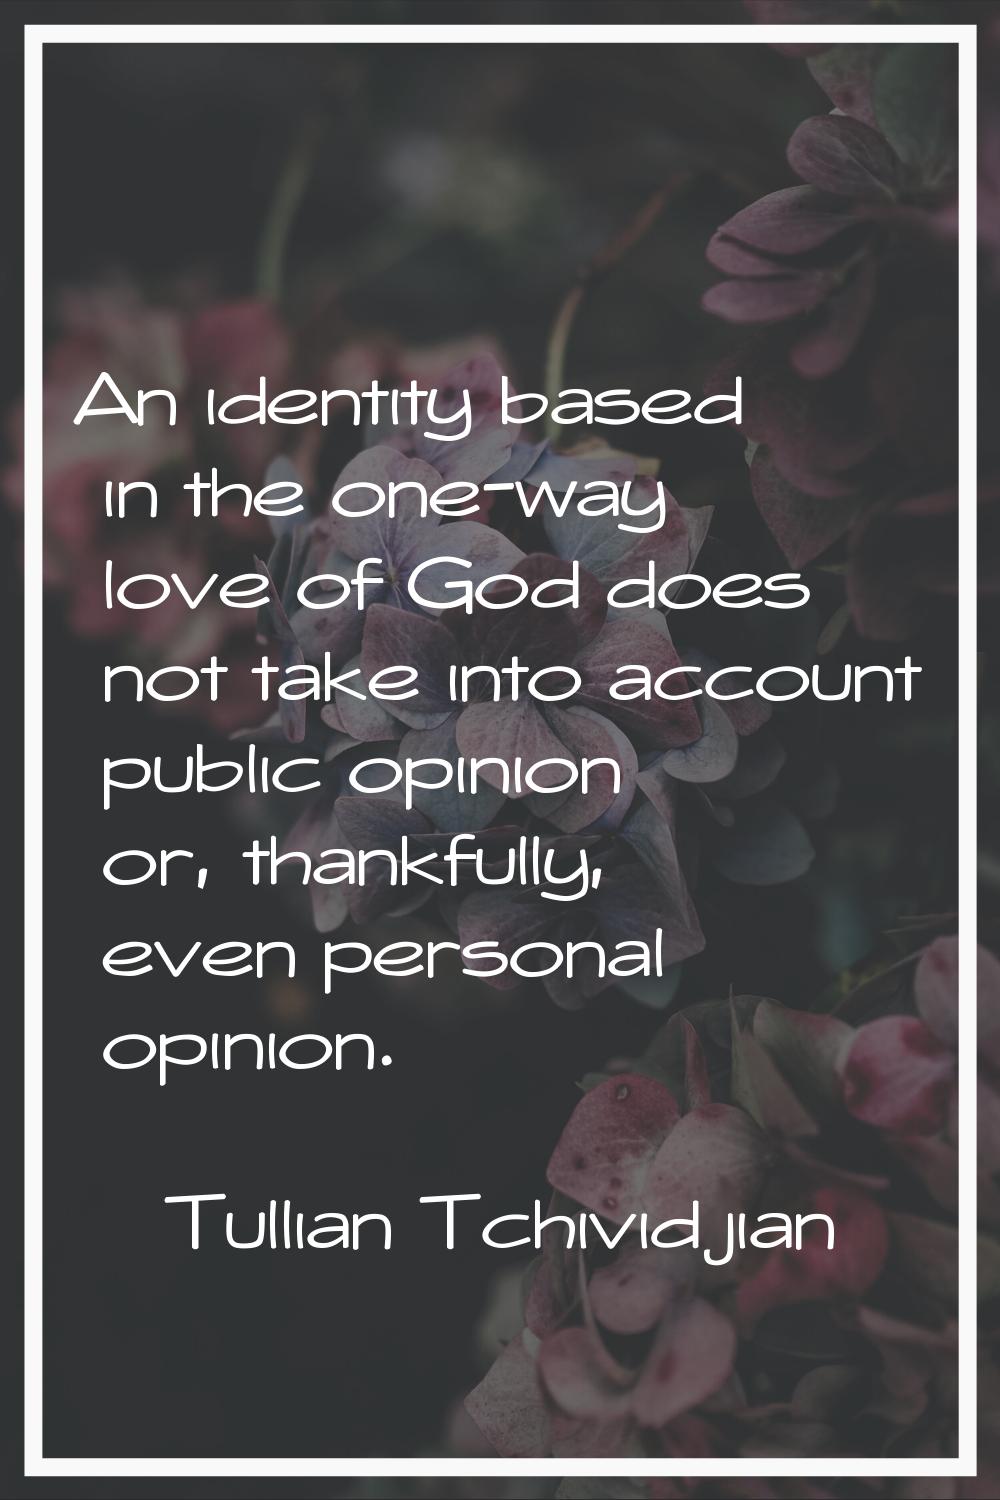 An identity based in the one-way love of God does not take into account public opinion or, thankful